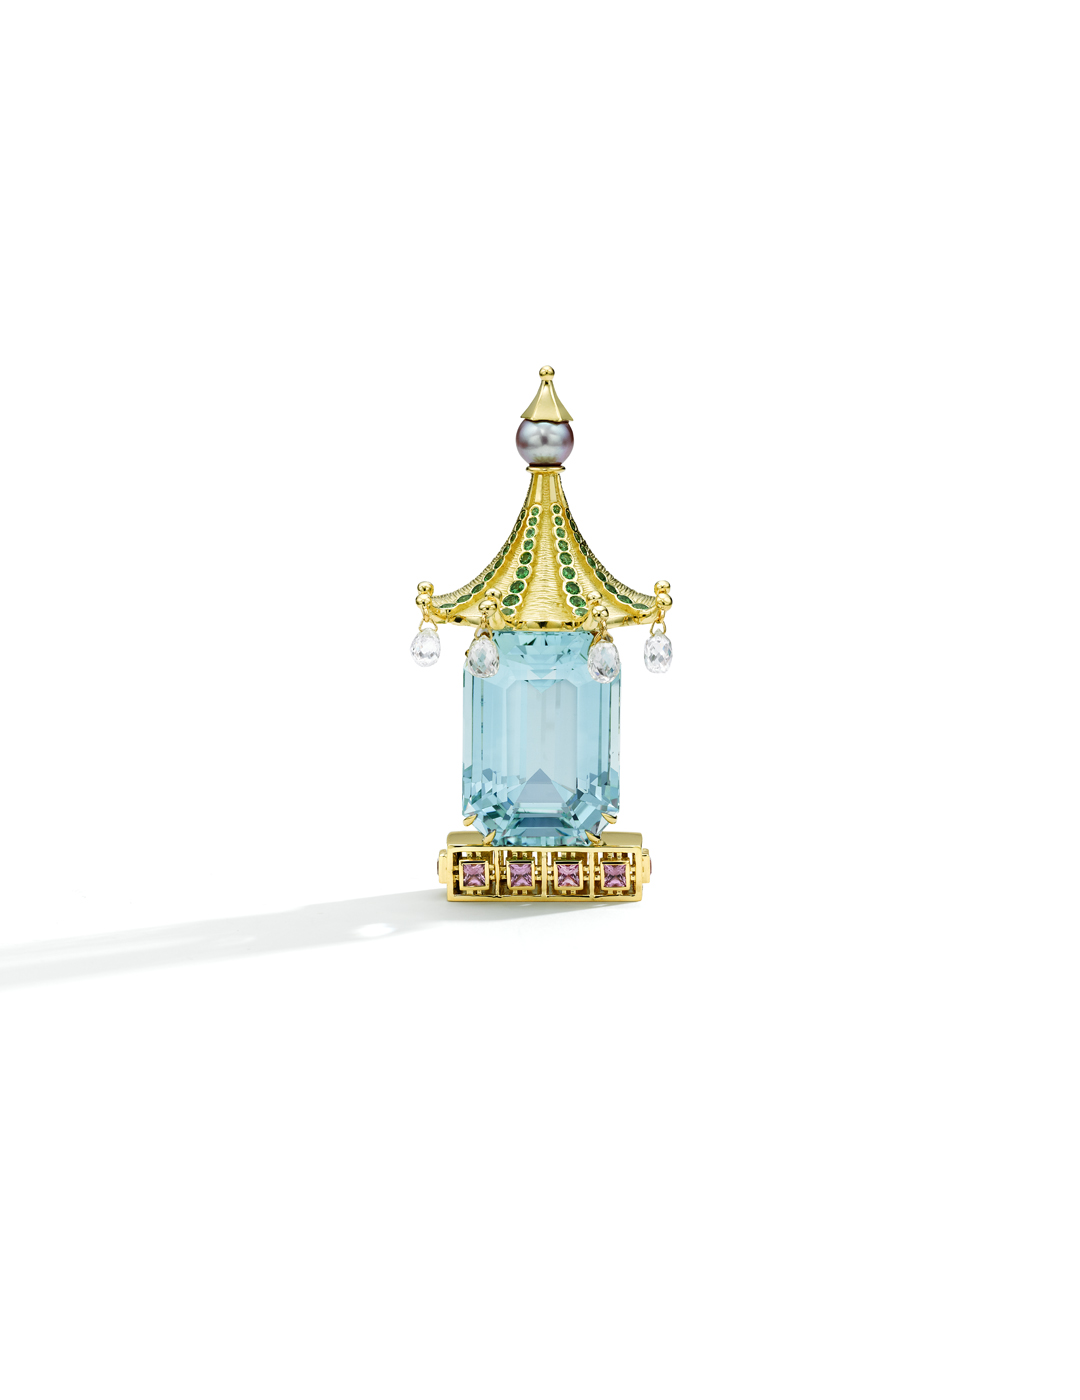 mish_jewelry_products_Chinois-Brch-Carousel-3